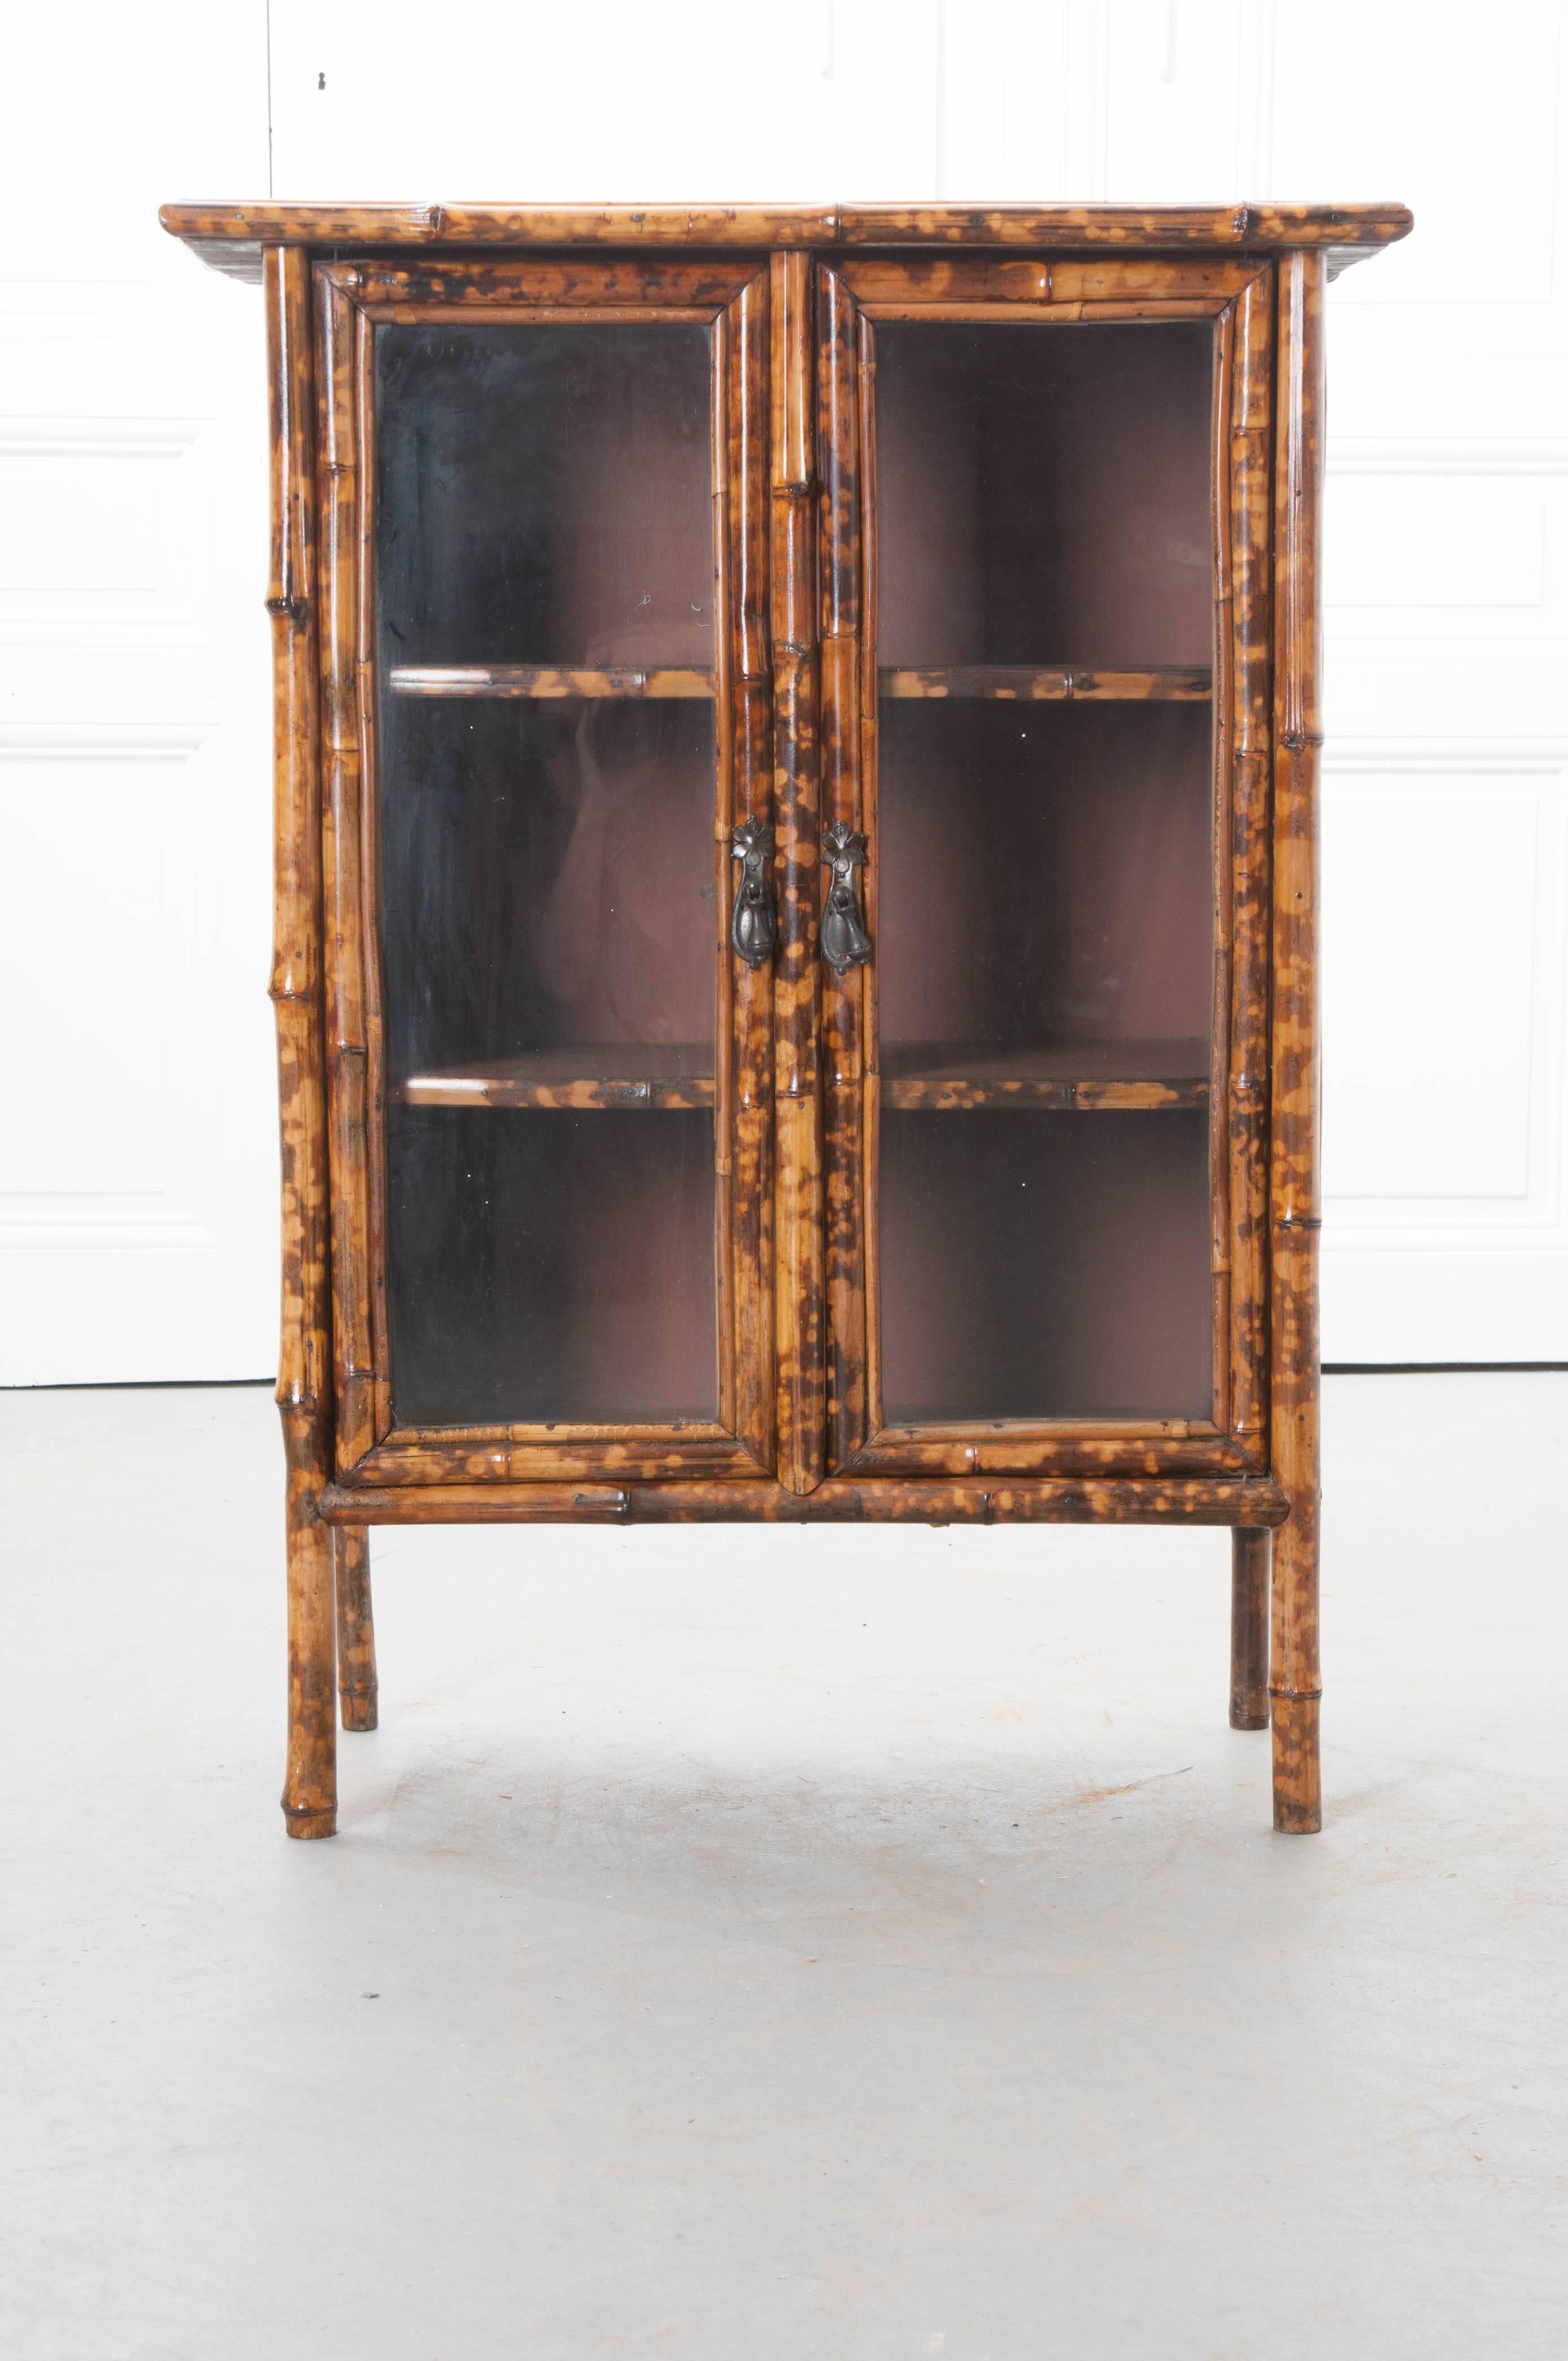 A wonderful 19th century English bamboo bookcase with glass doors and fantastic stamped leather sides. The top is accented with an Asian painted scene depicting mountains, cherry trees in bloom, and a distant pagoda. The two glass front doors close